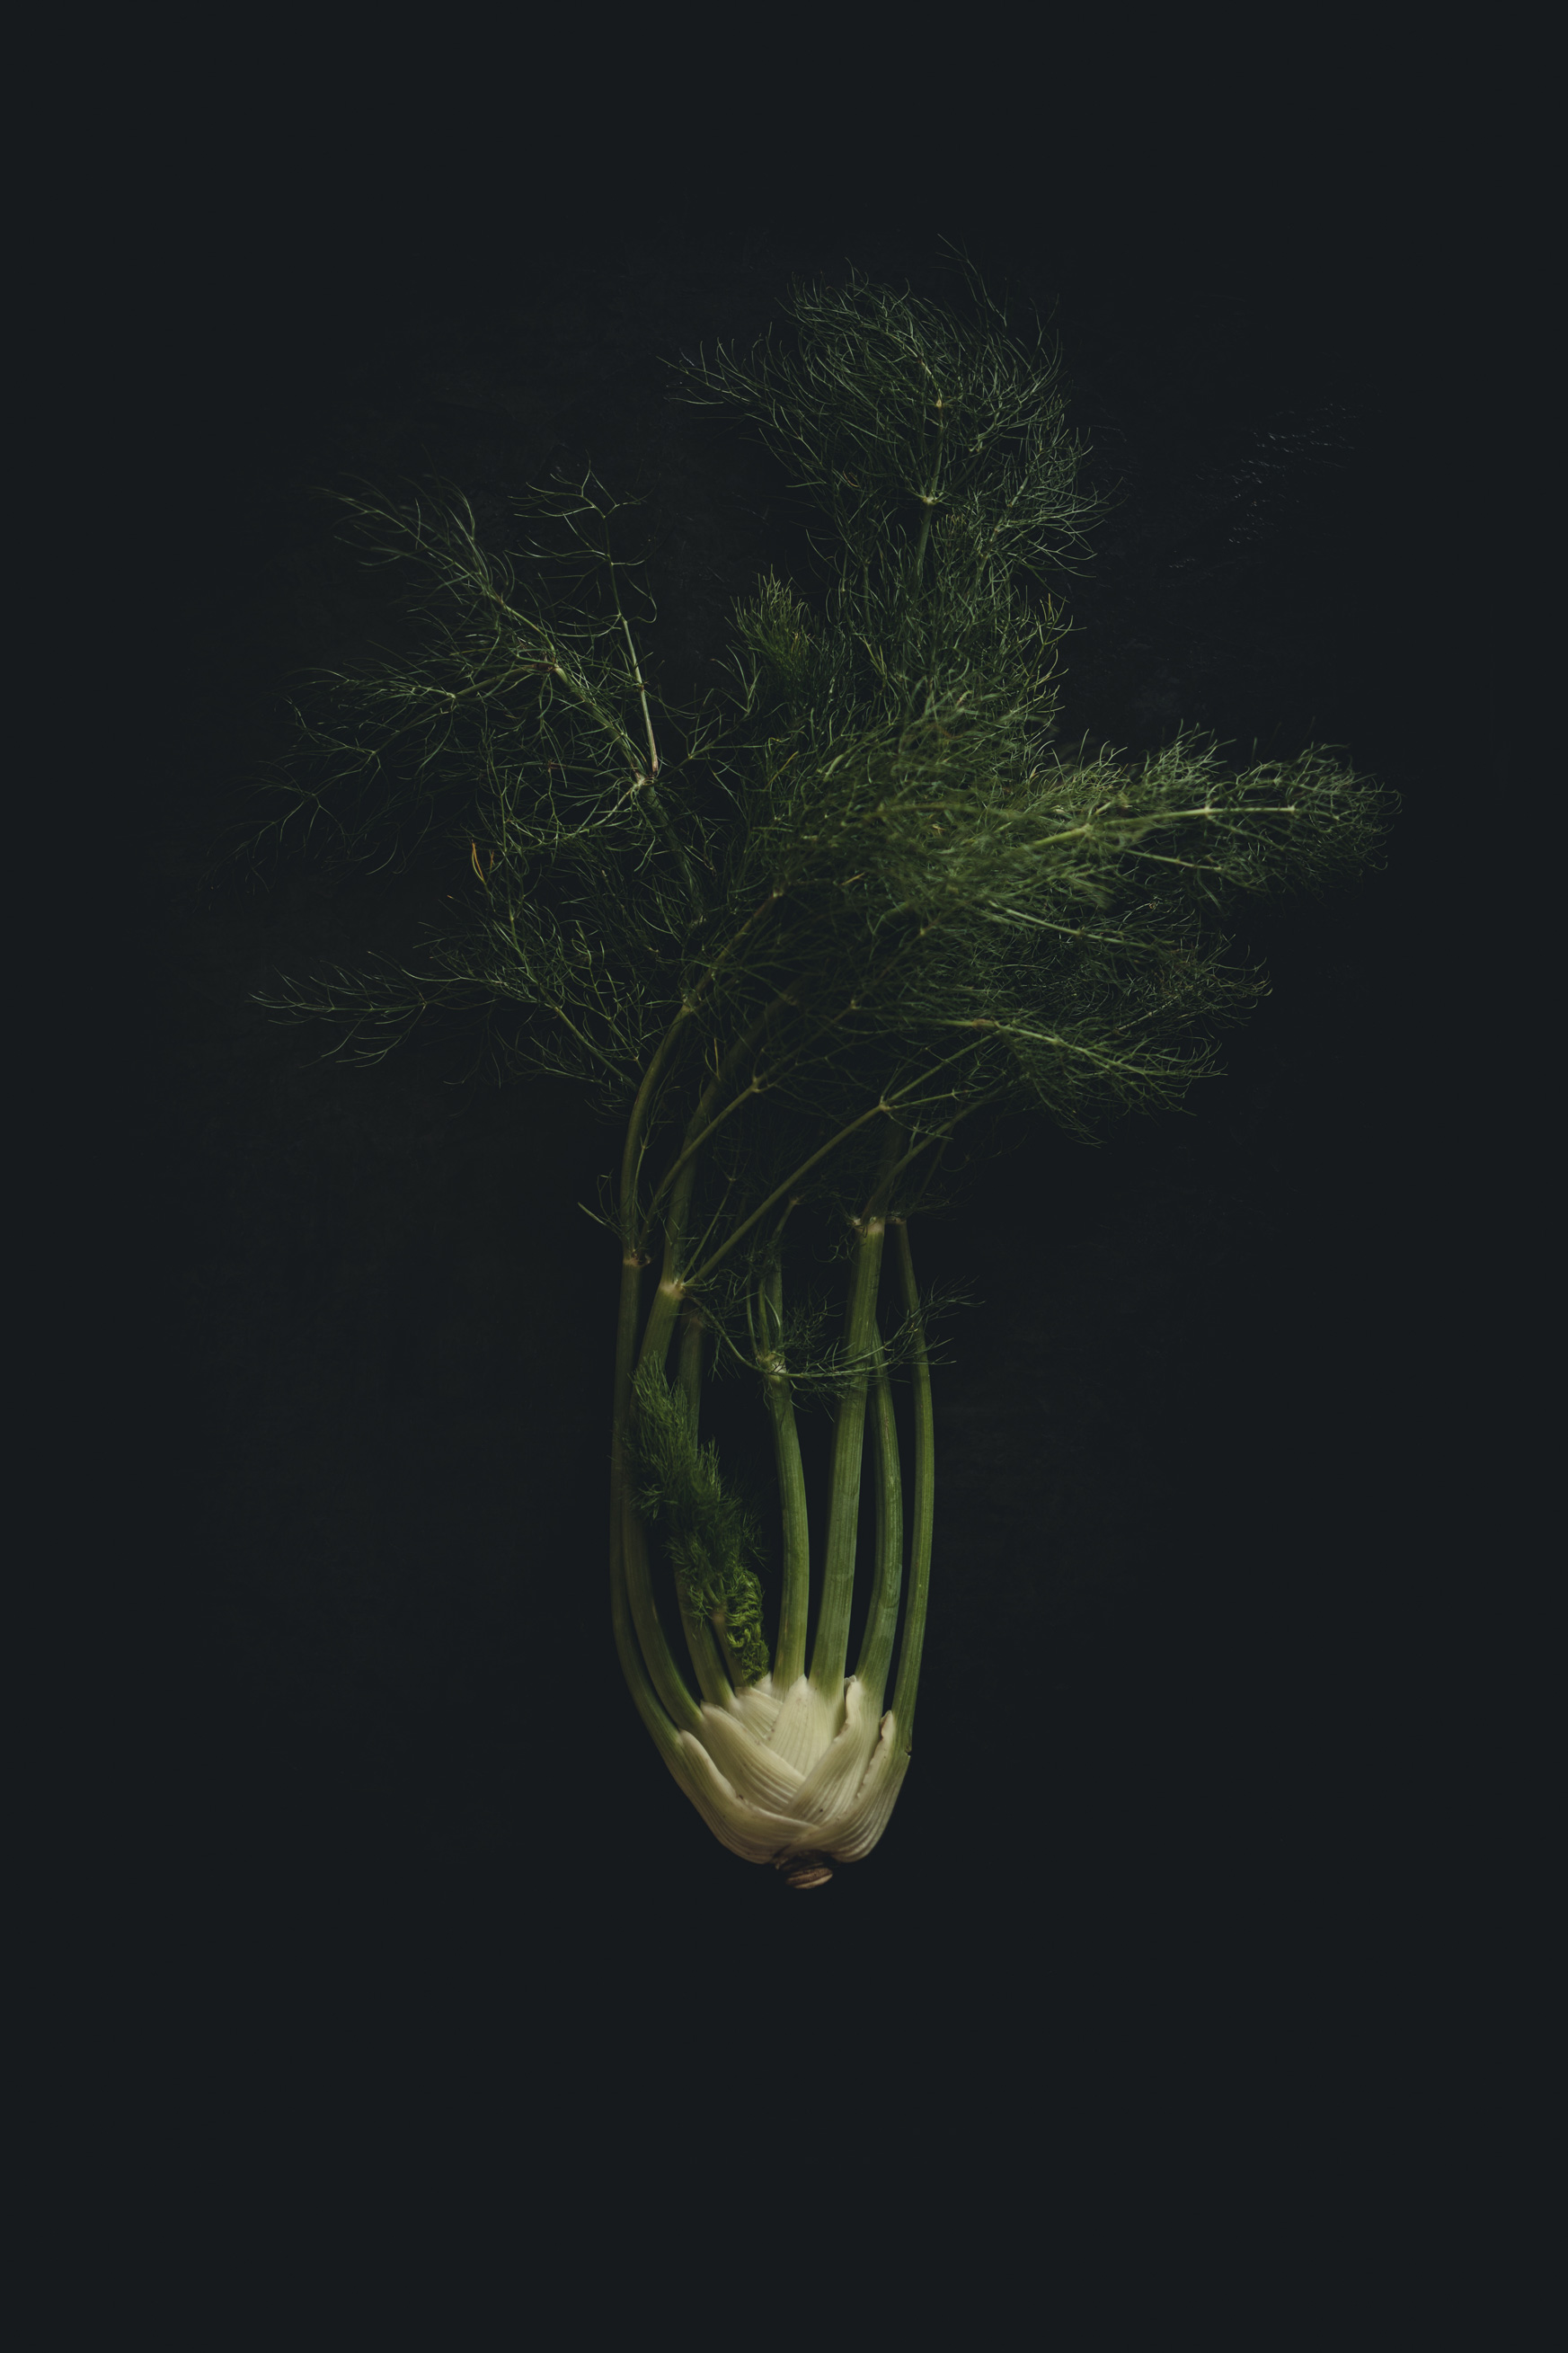 Fennel on a black background from the Moody Food series by John Robson Photography